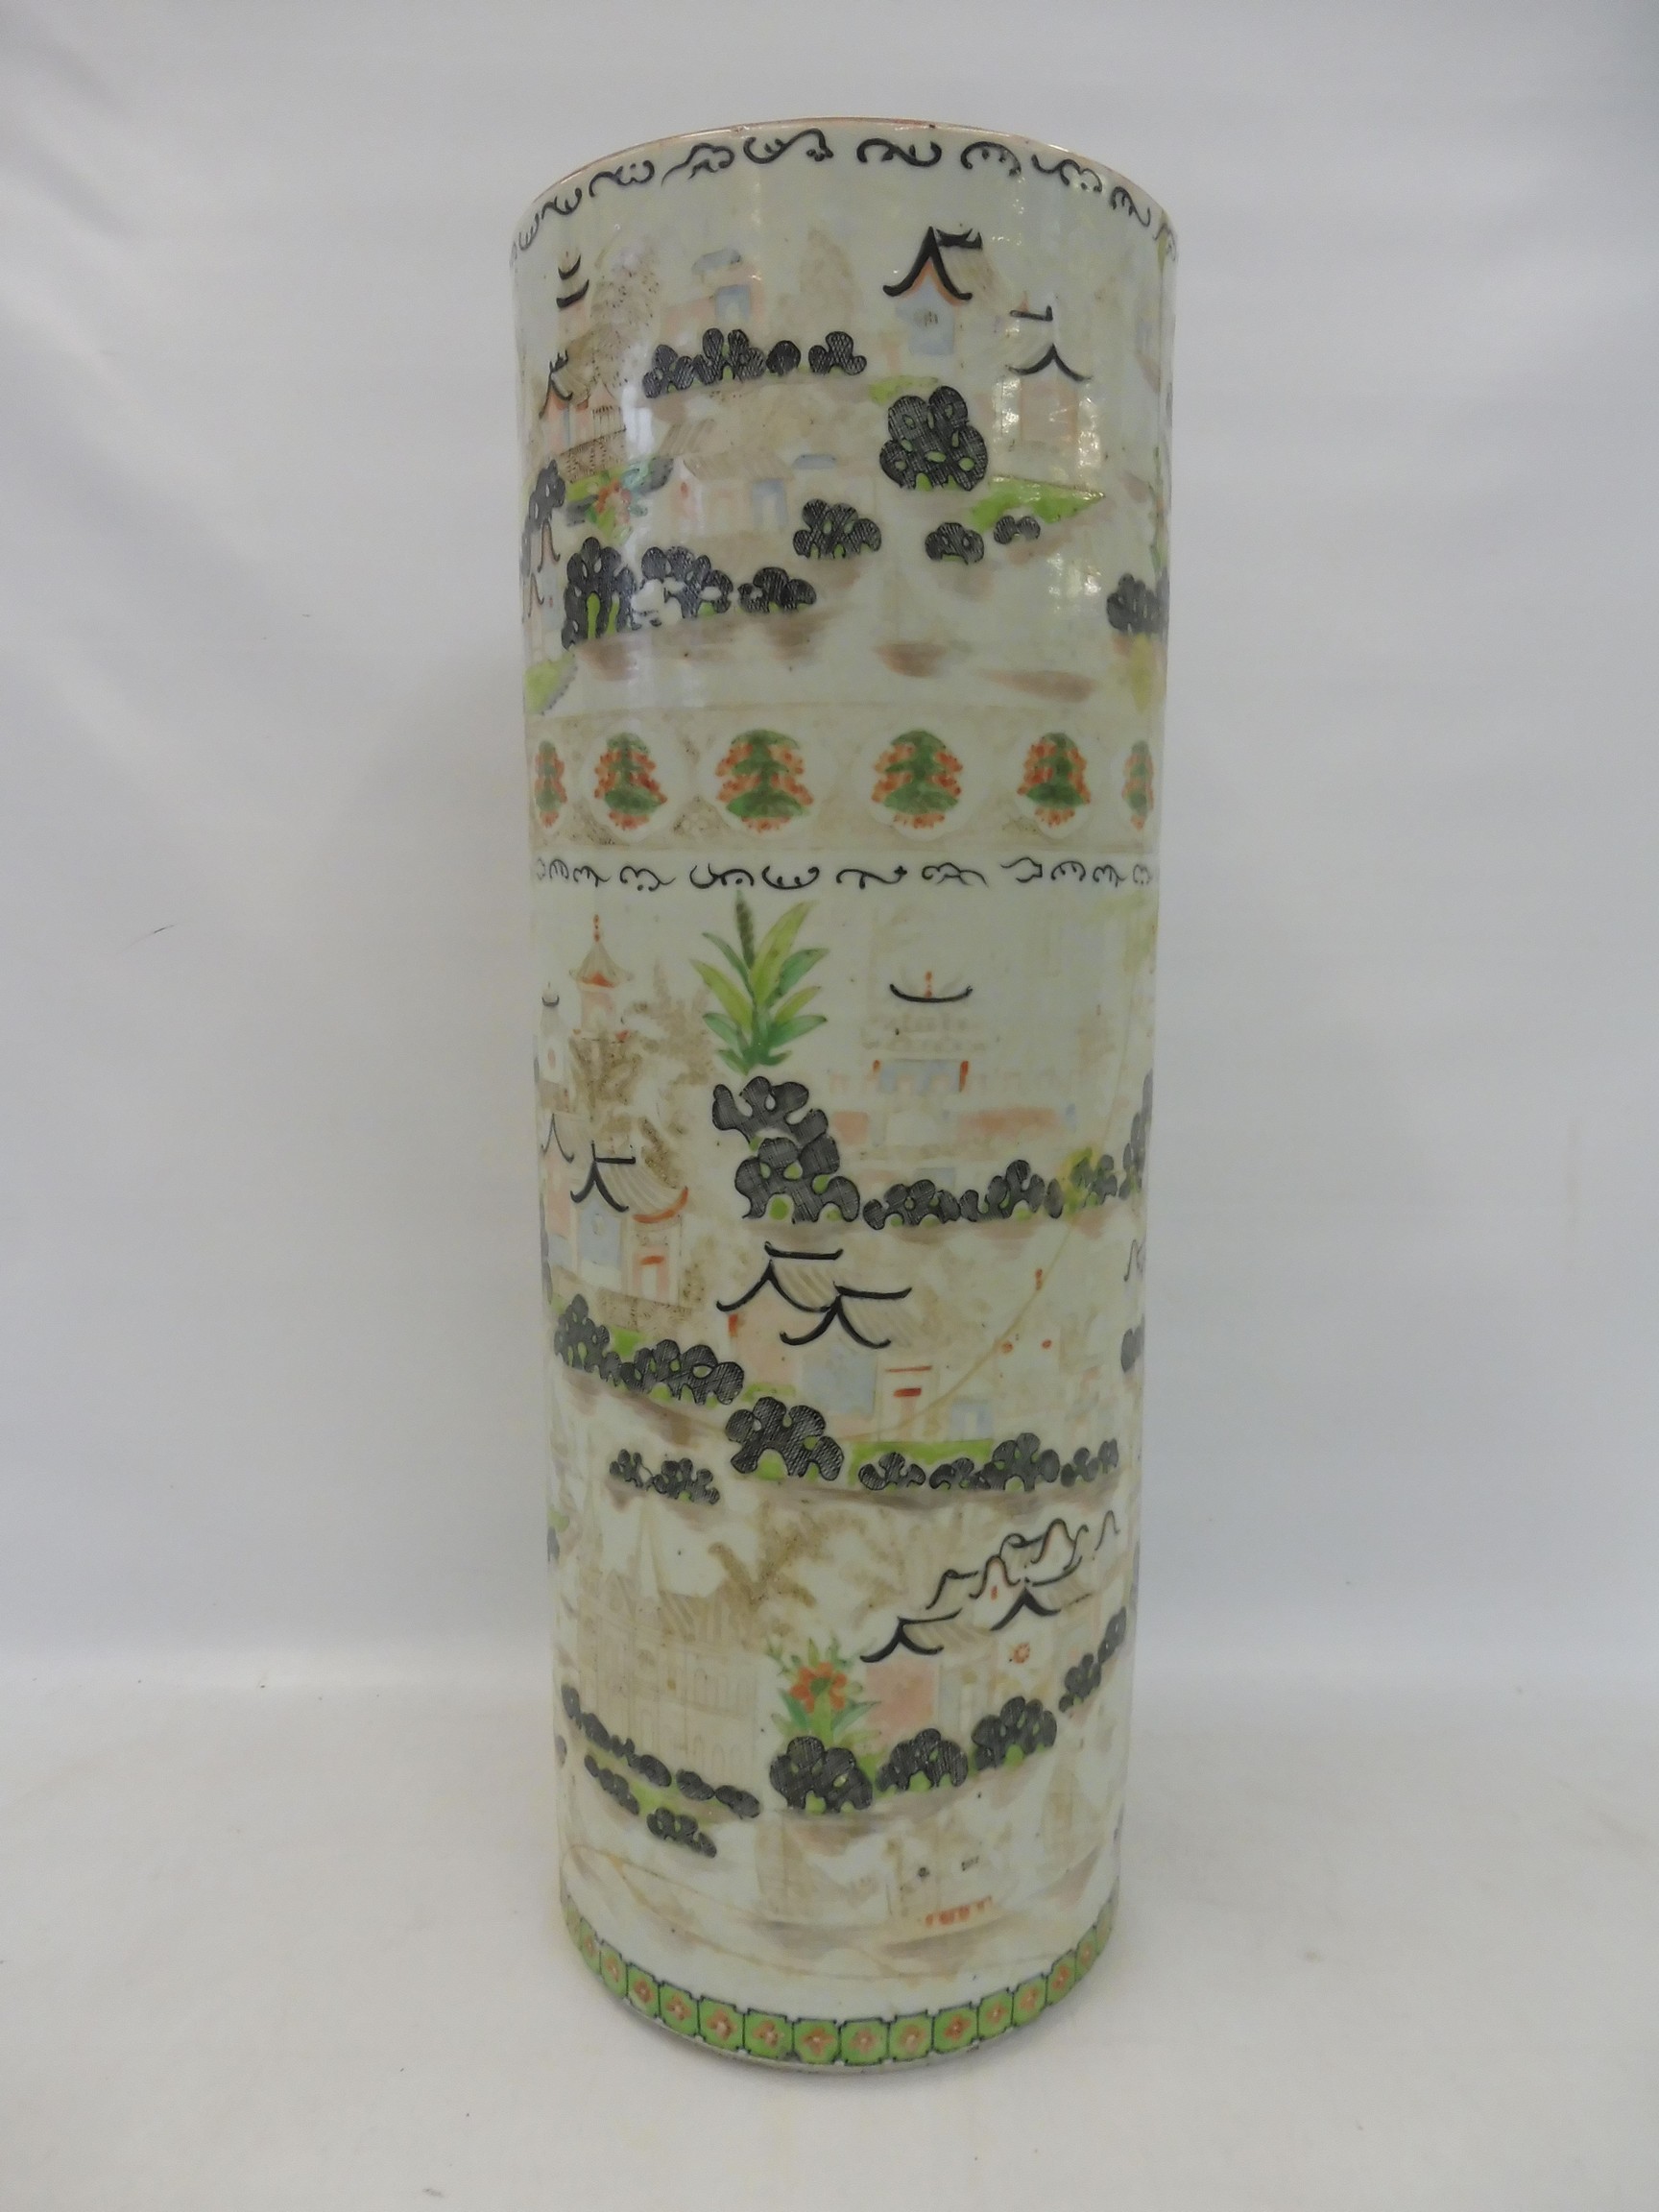 A Chinese umbrella/stick stand, unusually decorated with ships and buildings, possibly 18th